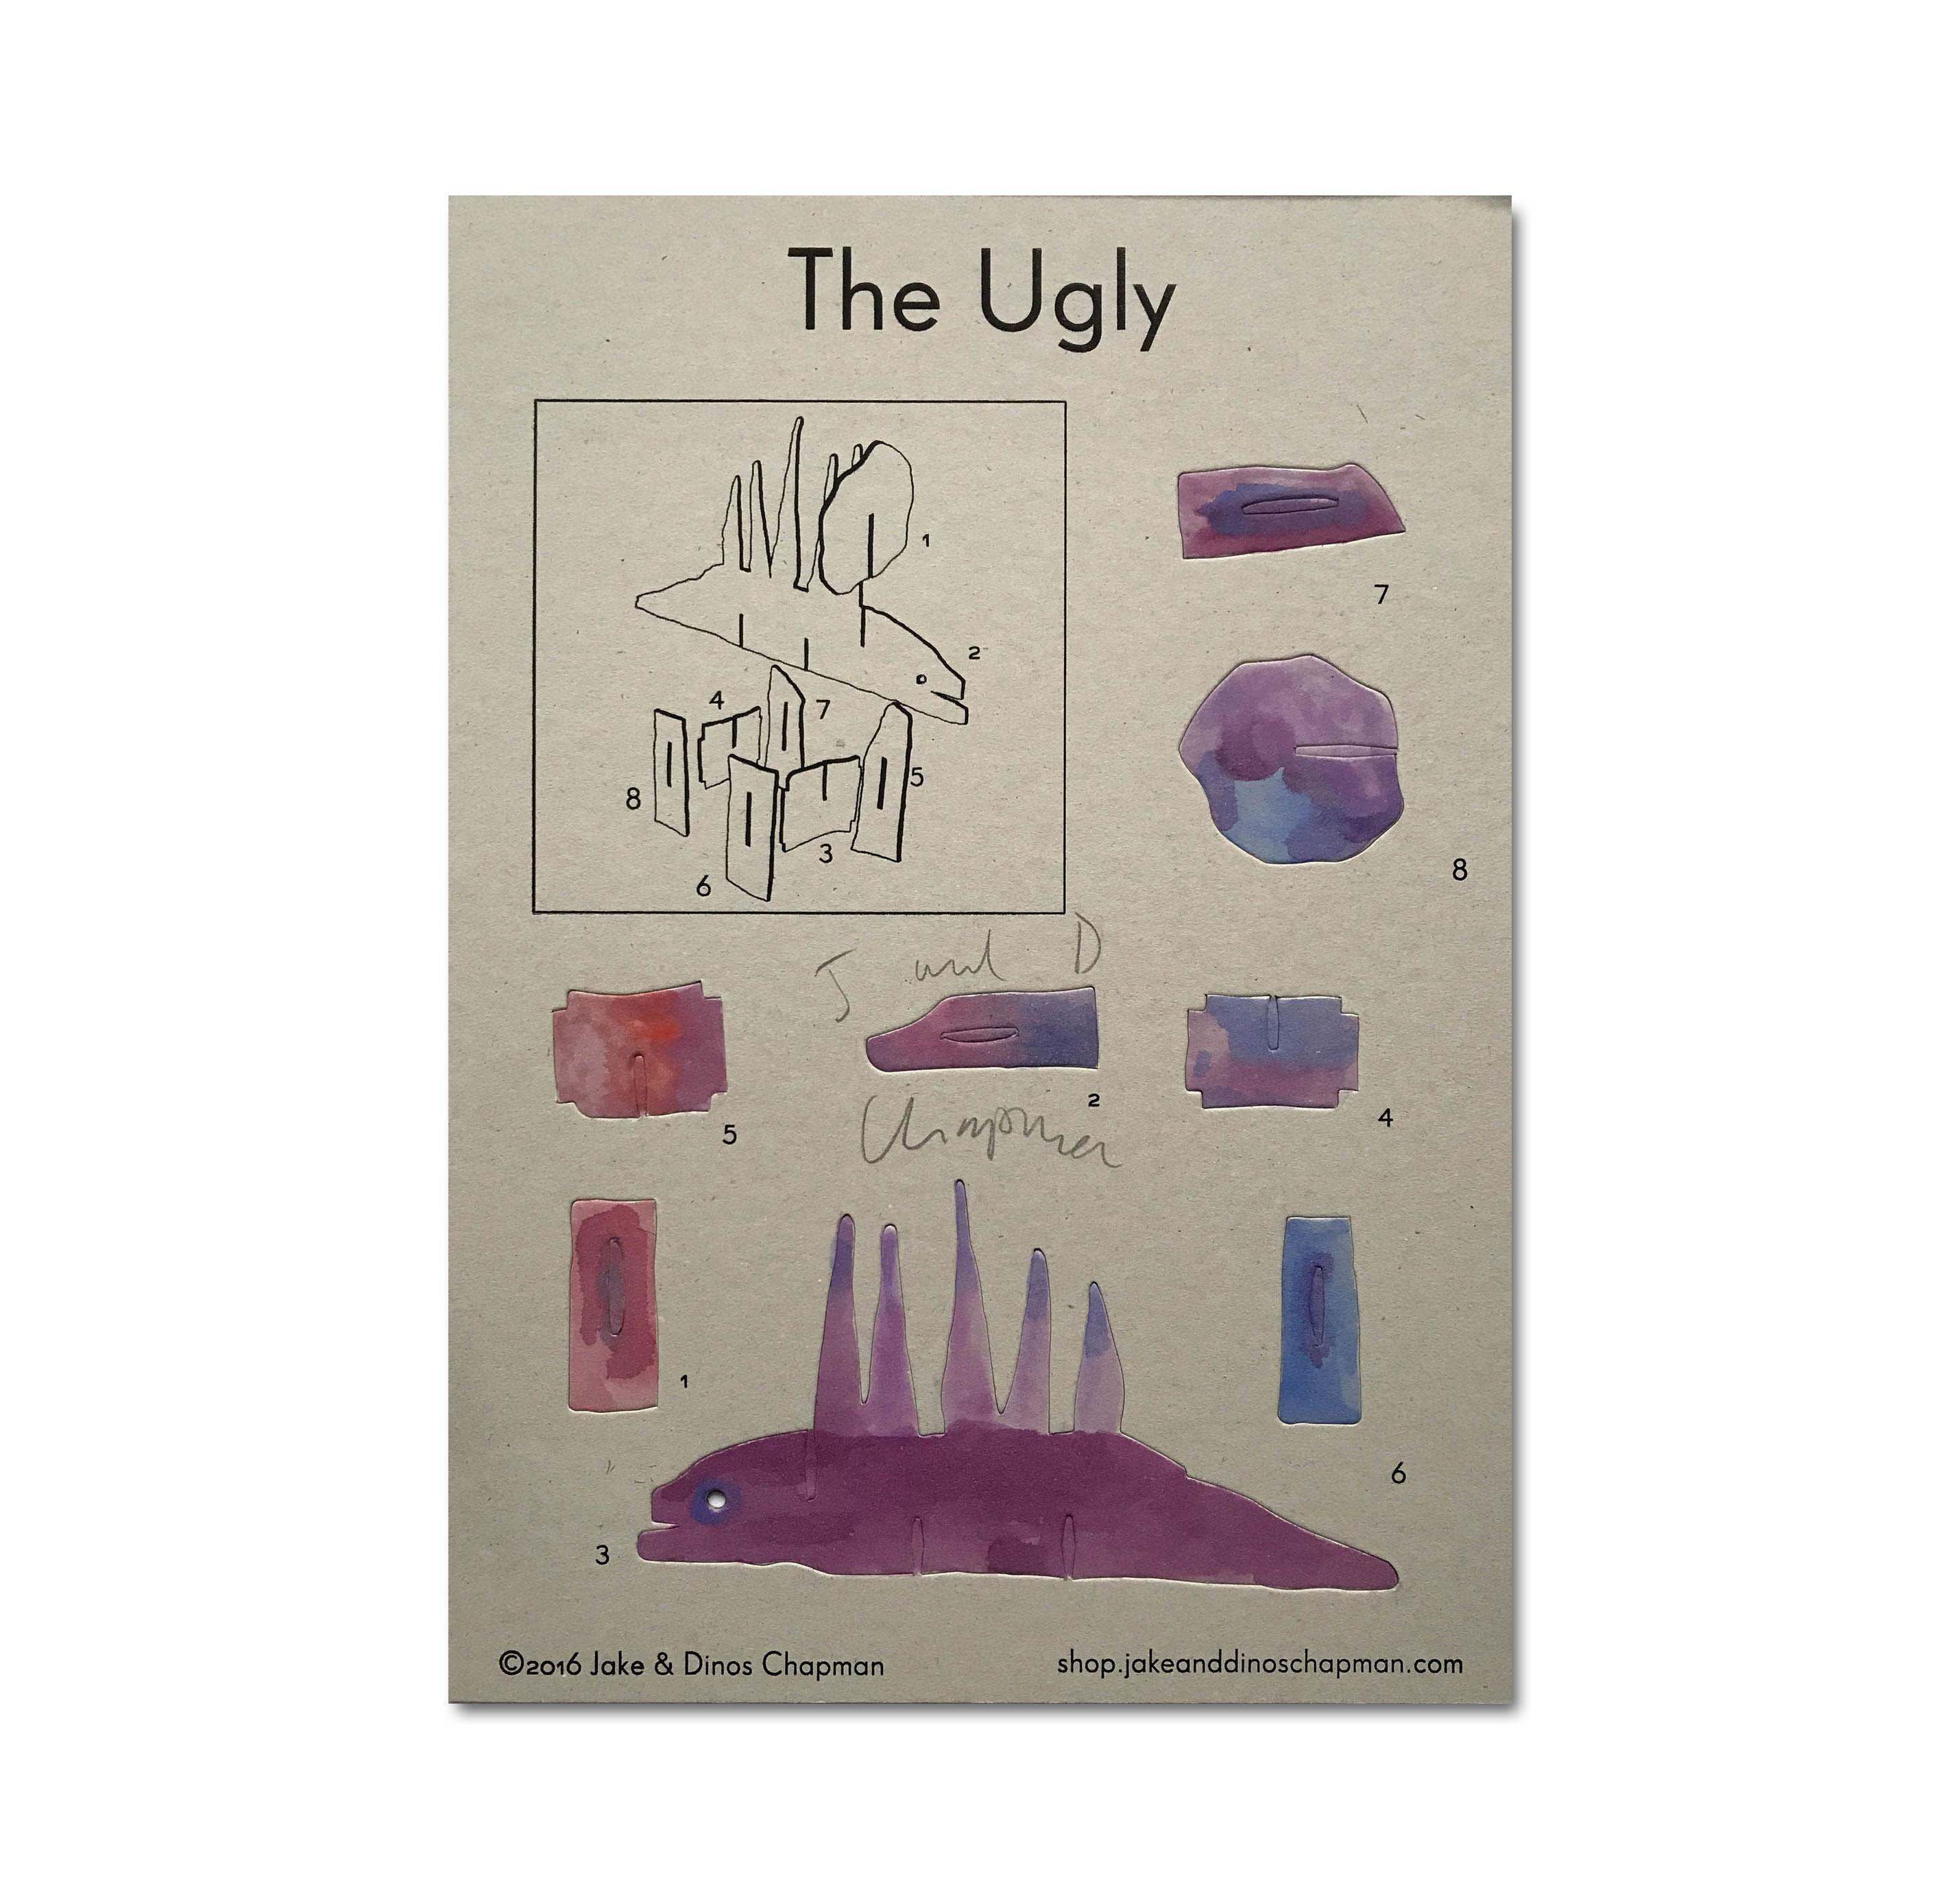 Papier Signé Jake & Dinos Chapman « The Good, Bad and the Ugly » Dinosaurs, 2016 en vente